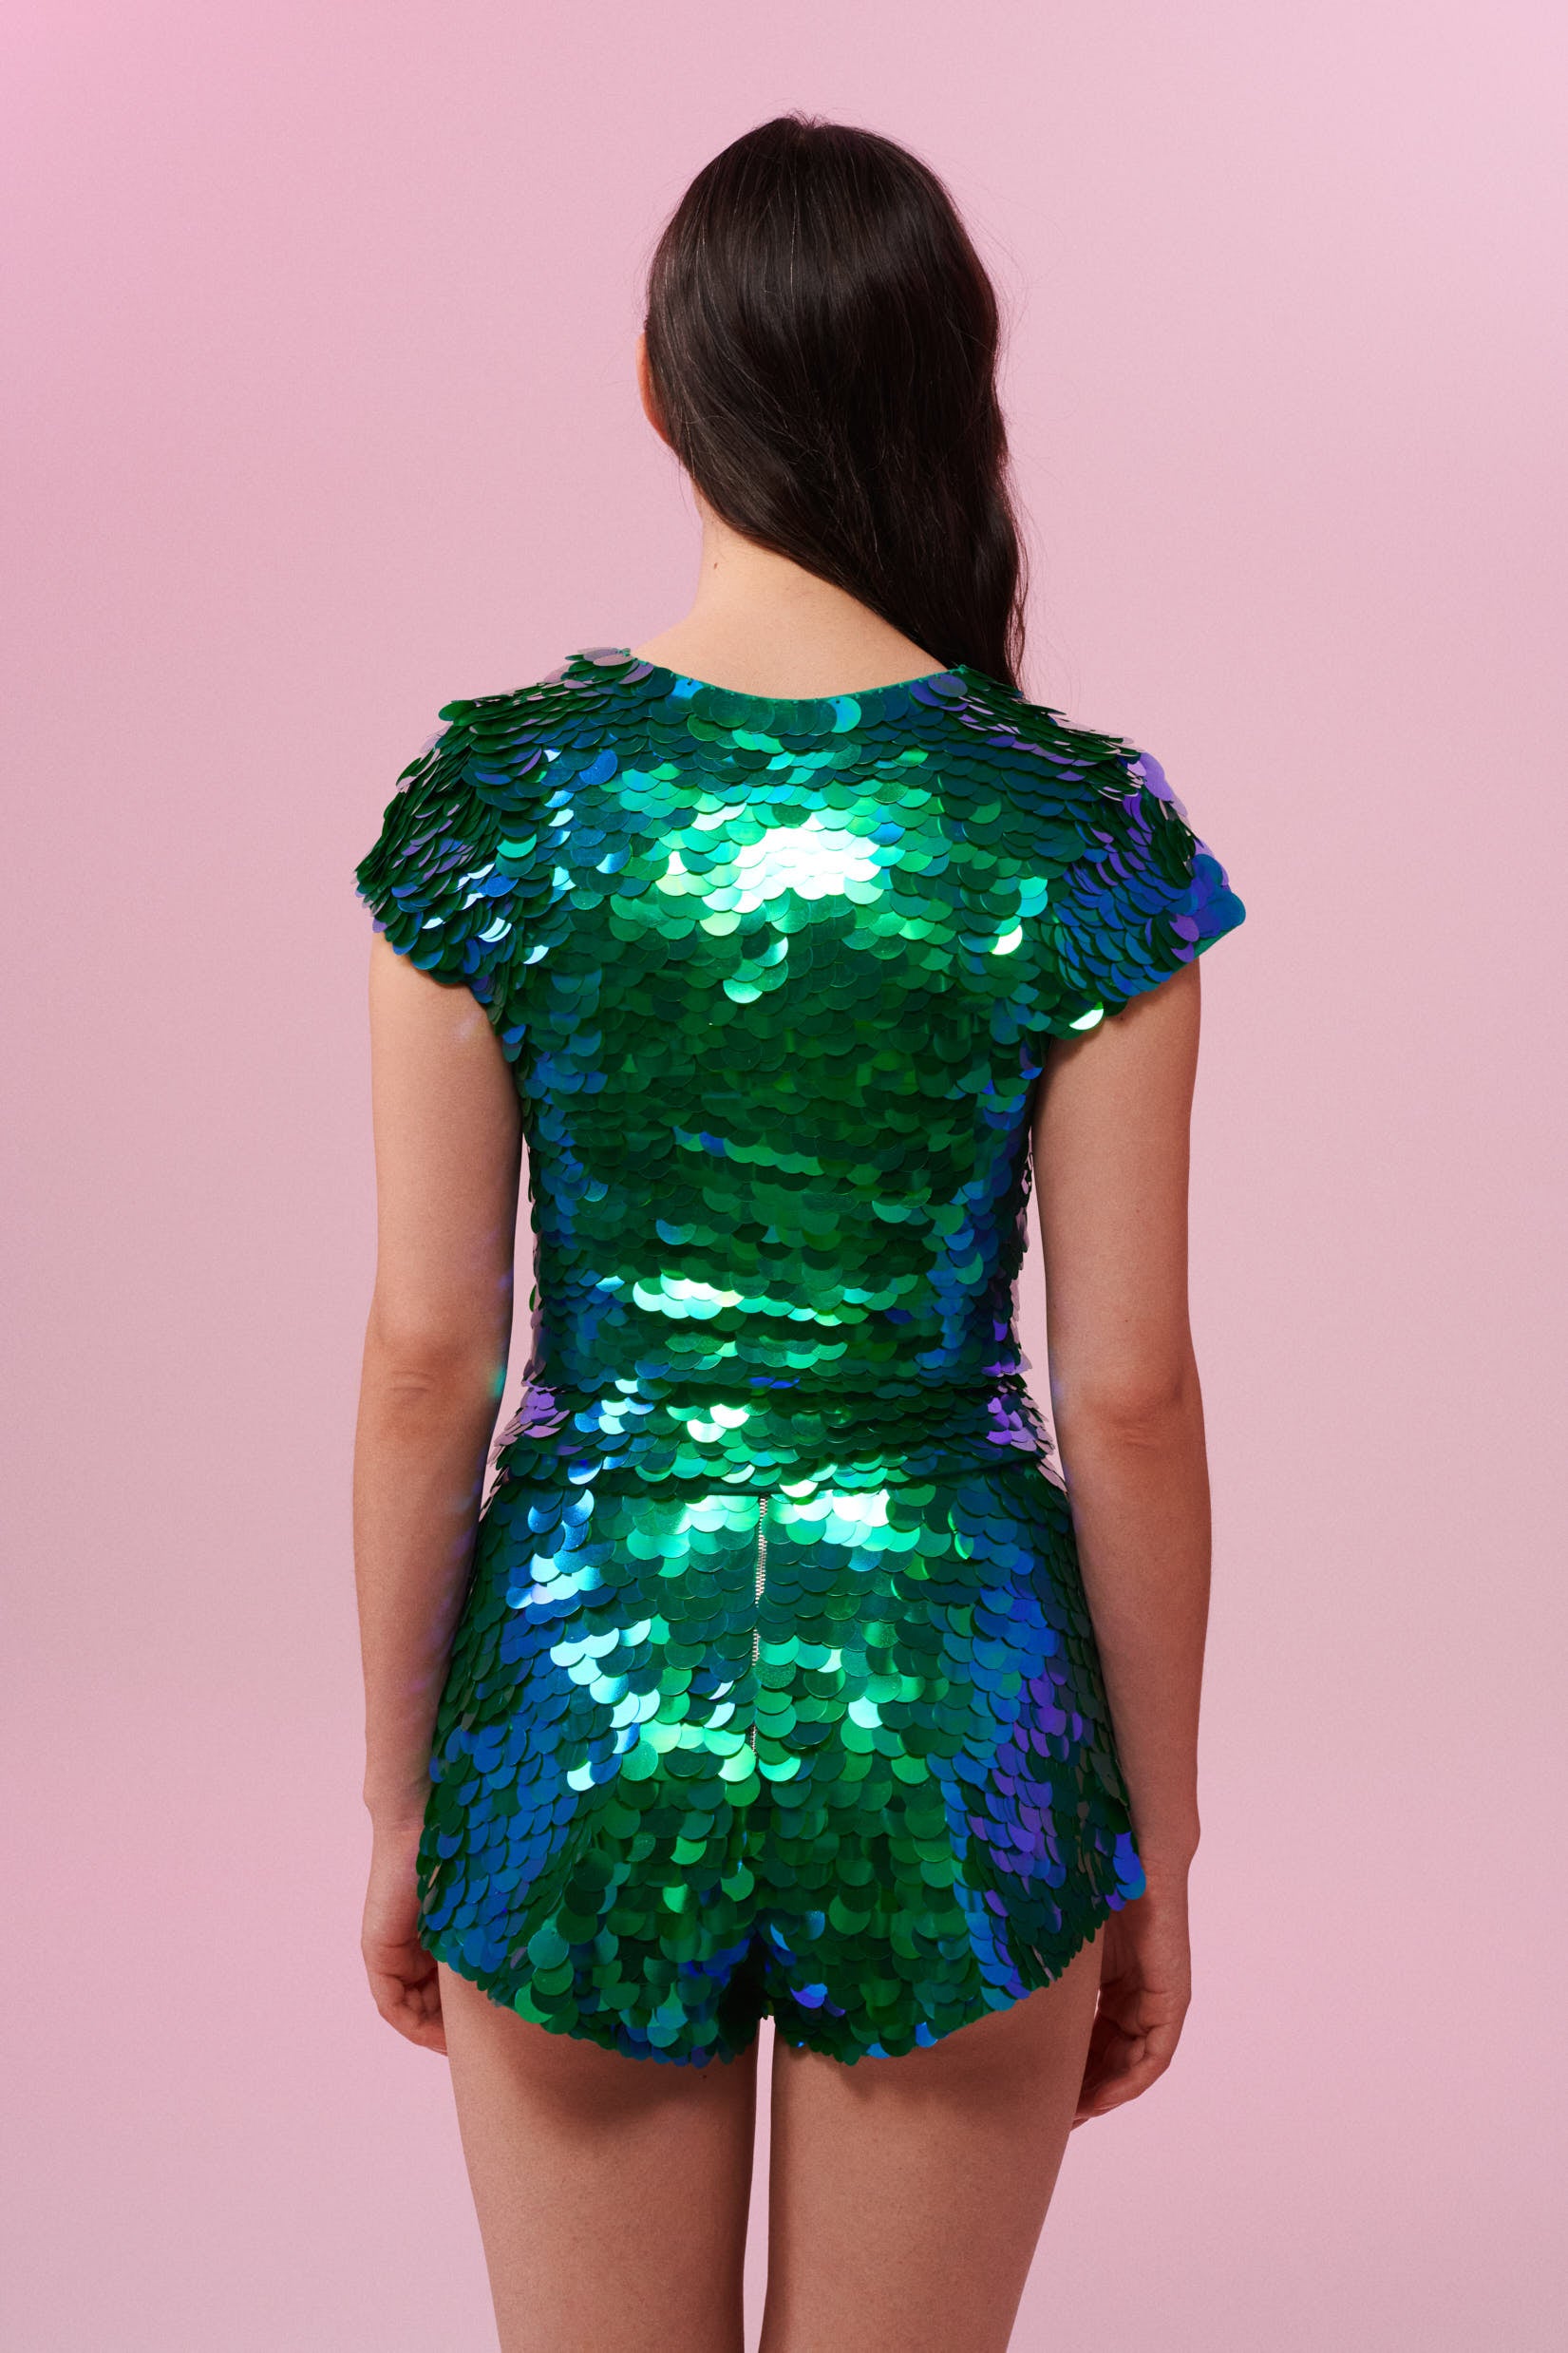 A rear view of a woman with brown hair, wearing a sequin stretchy top with capped sleeves made with large round holographic Rosa Bloom sequins. The Gwen sequins glisten, creating a mix of shimmering colours of emerald green and ultramarine blue. The model is also wearing matching festival sequin high waisted shorts. 